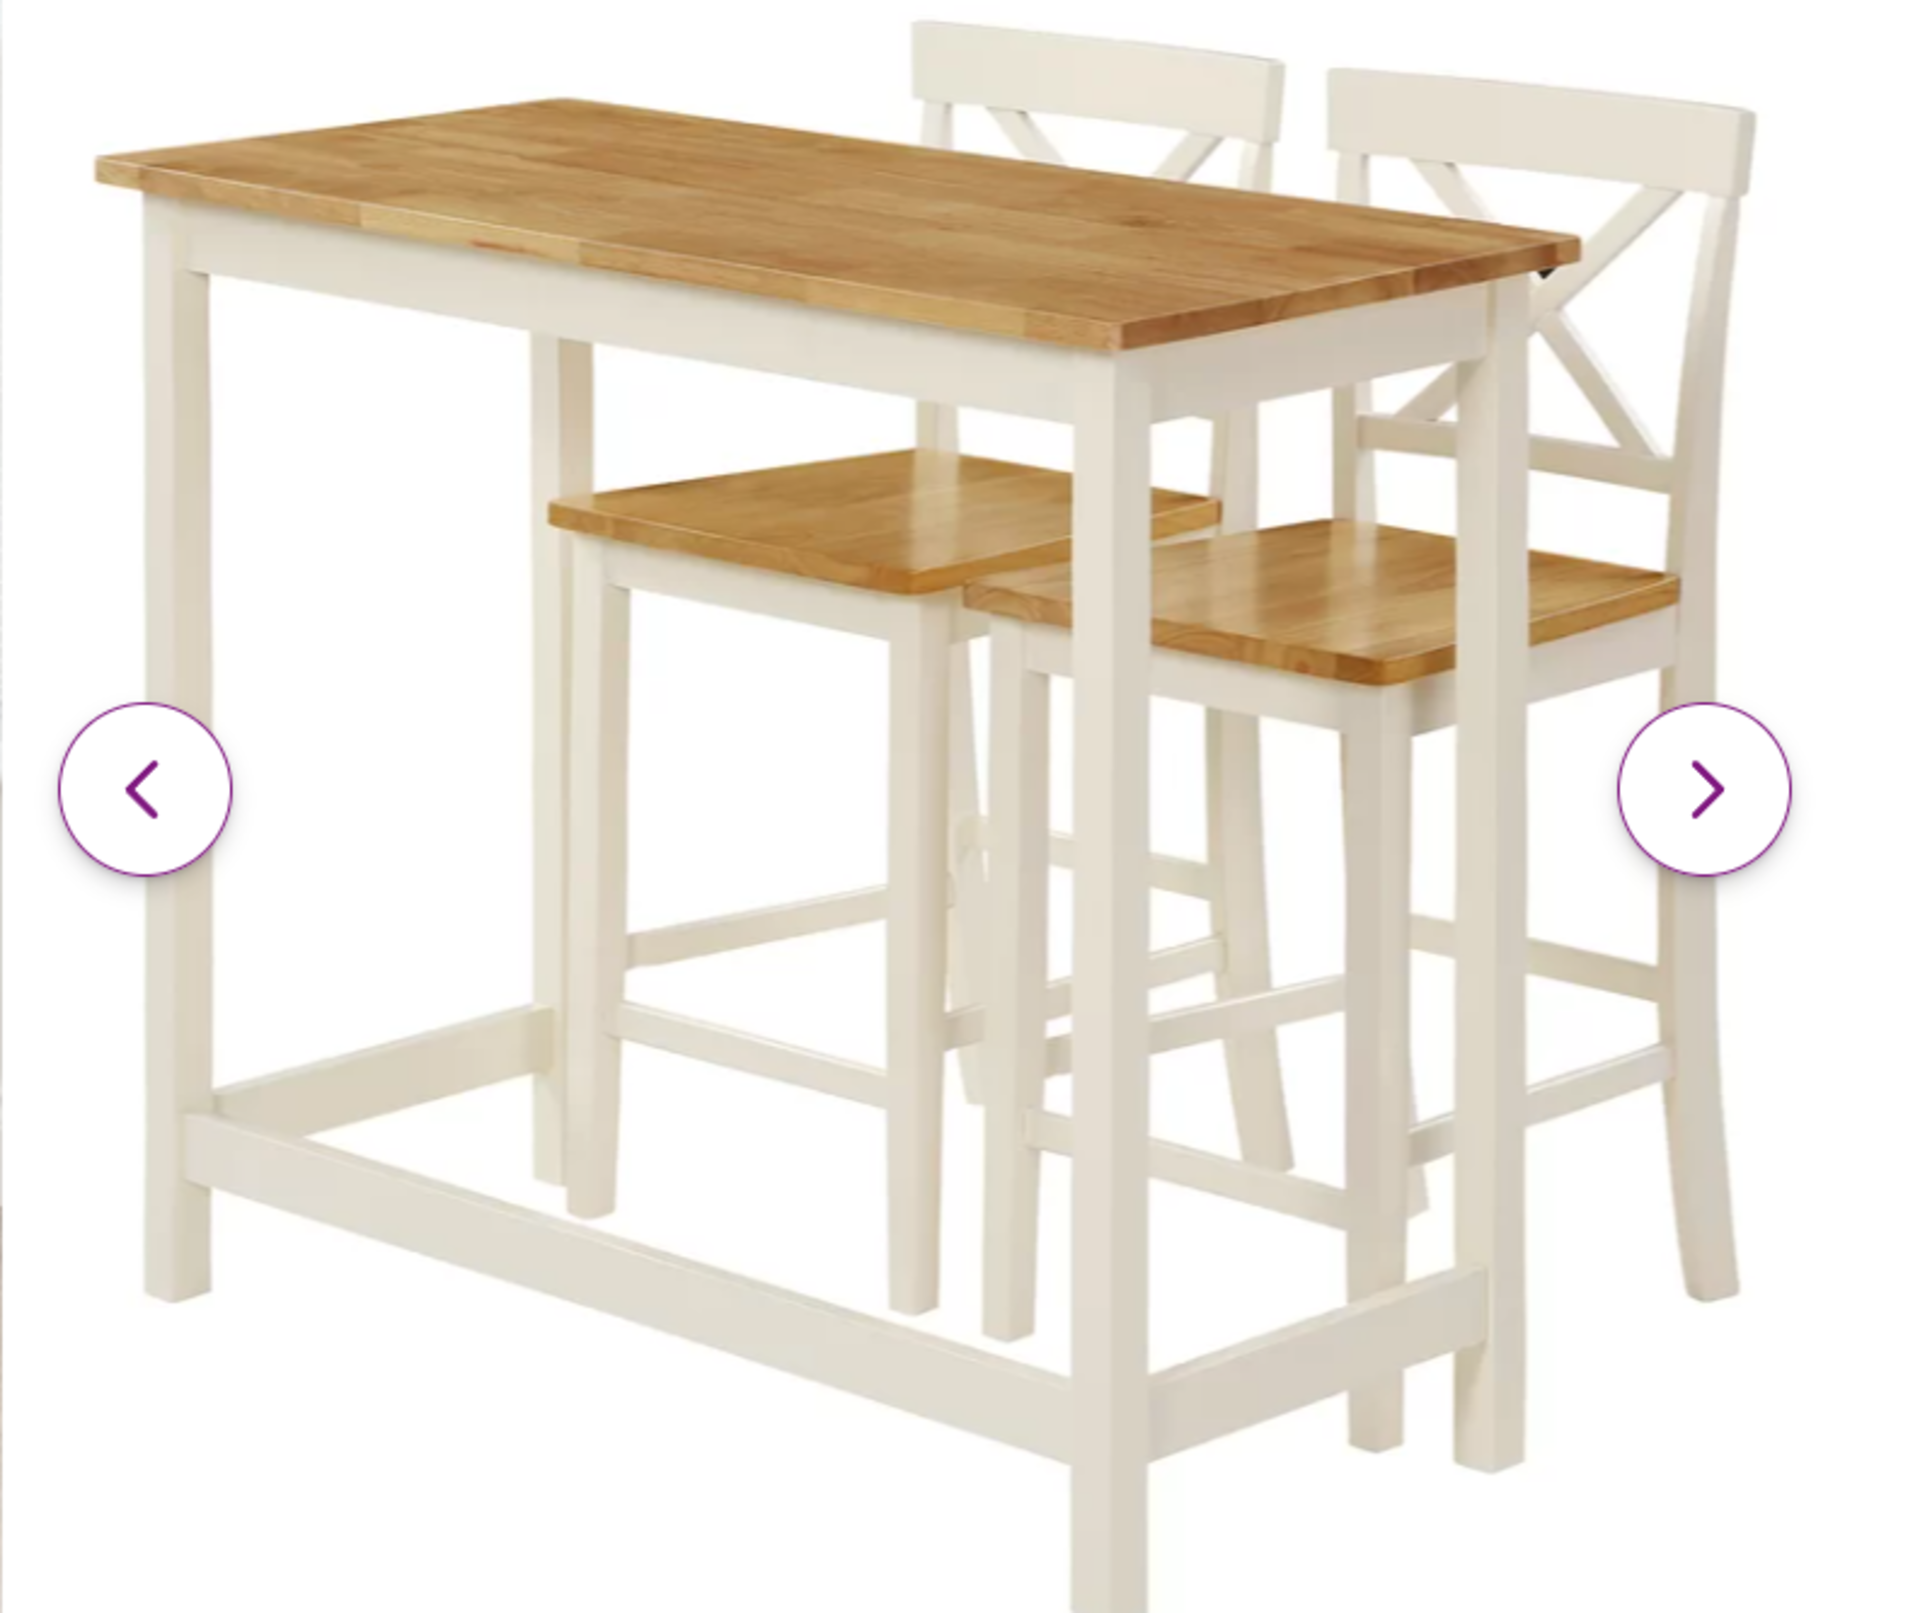 Clarkson 2 - Person Solid Wood Dining Set. RRP £239.99. The Clarkson bar table set features a - Image 2 of 2